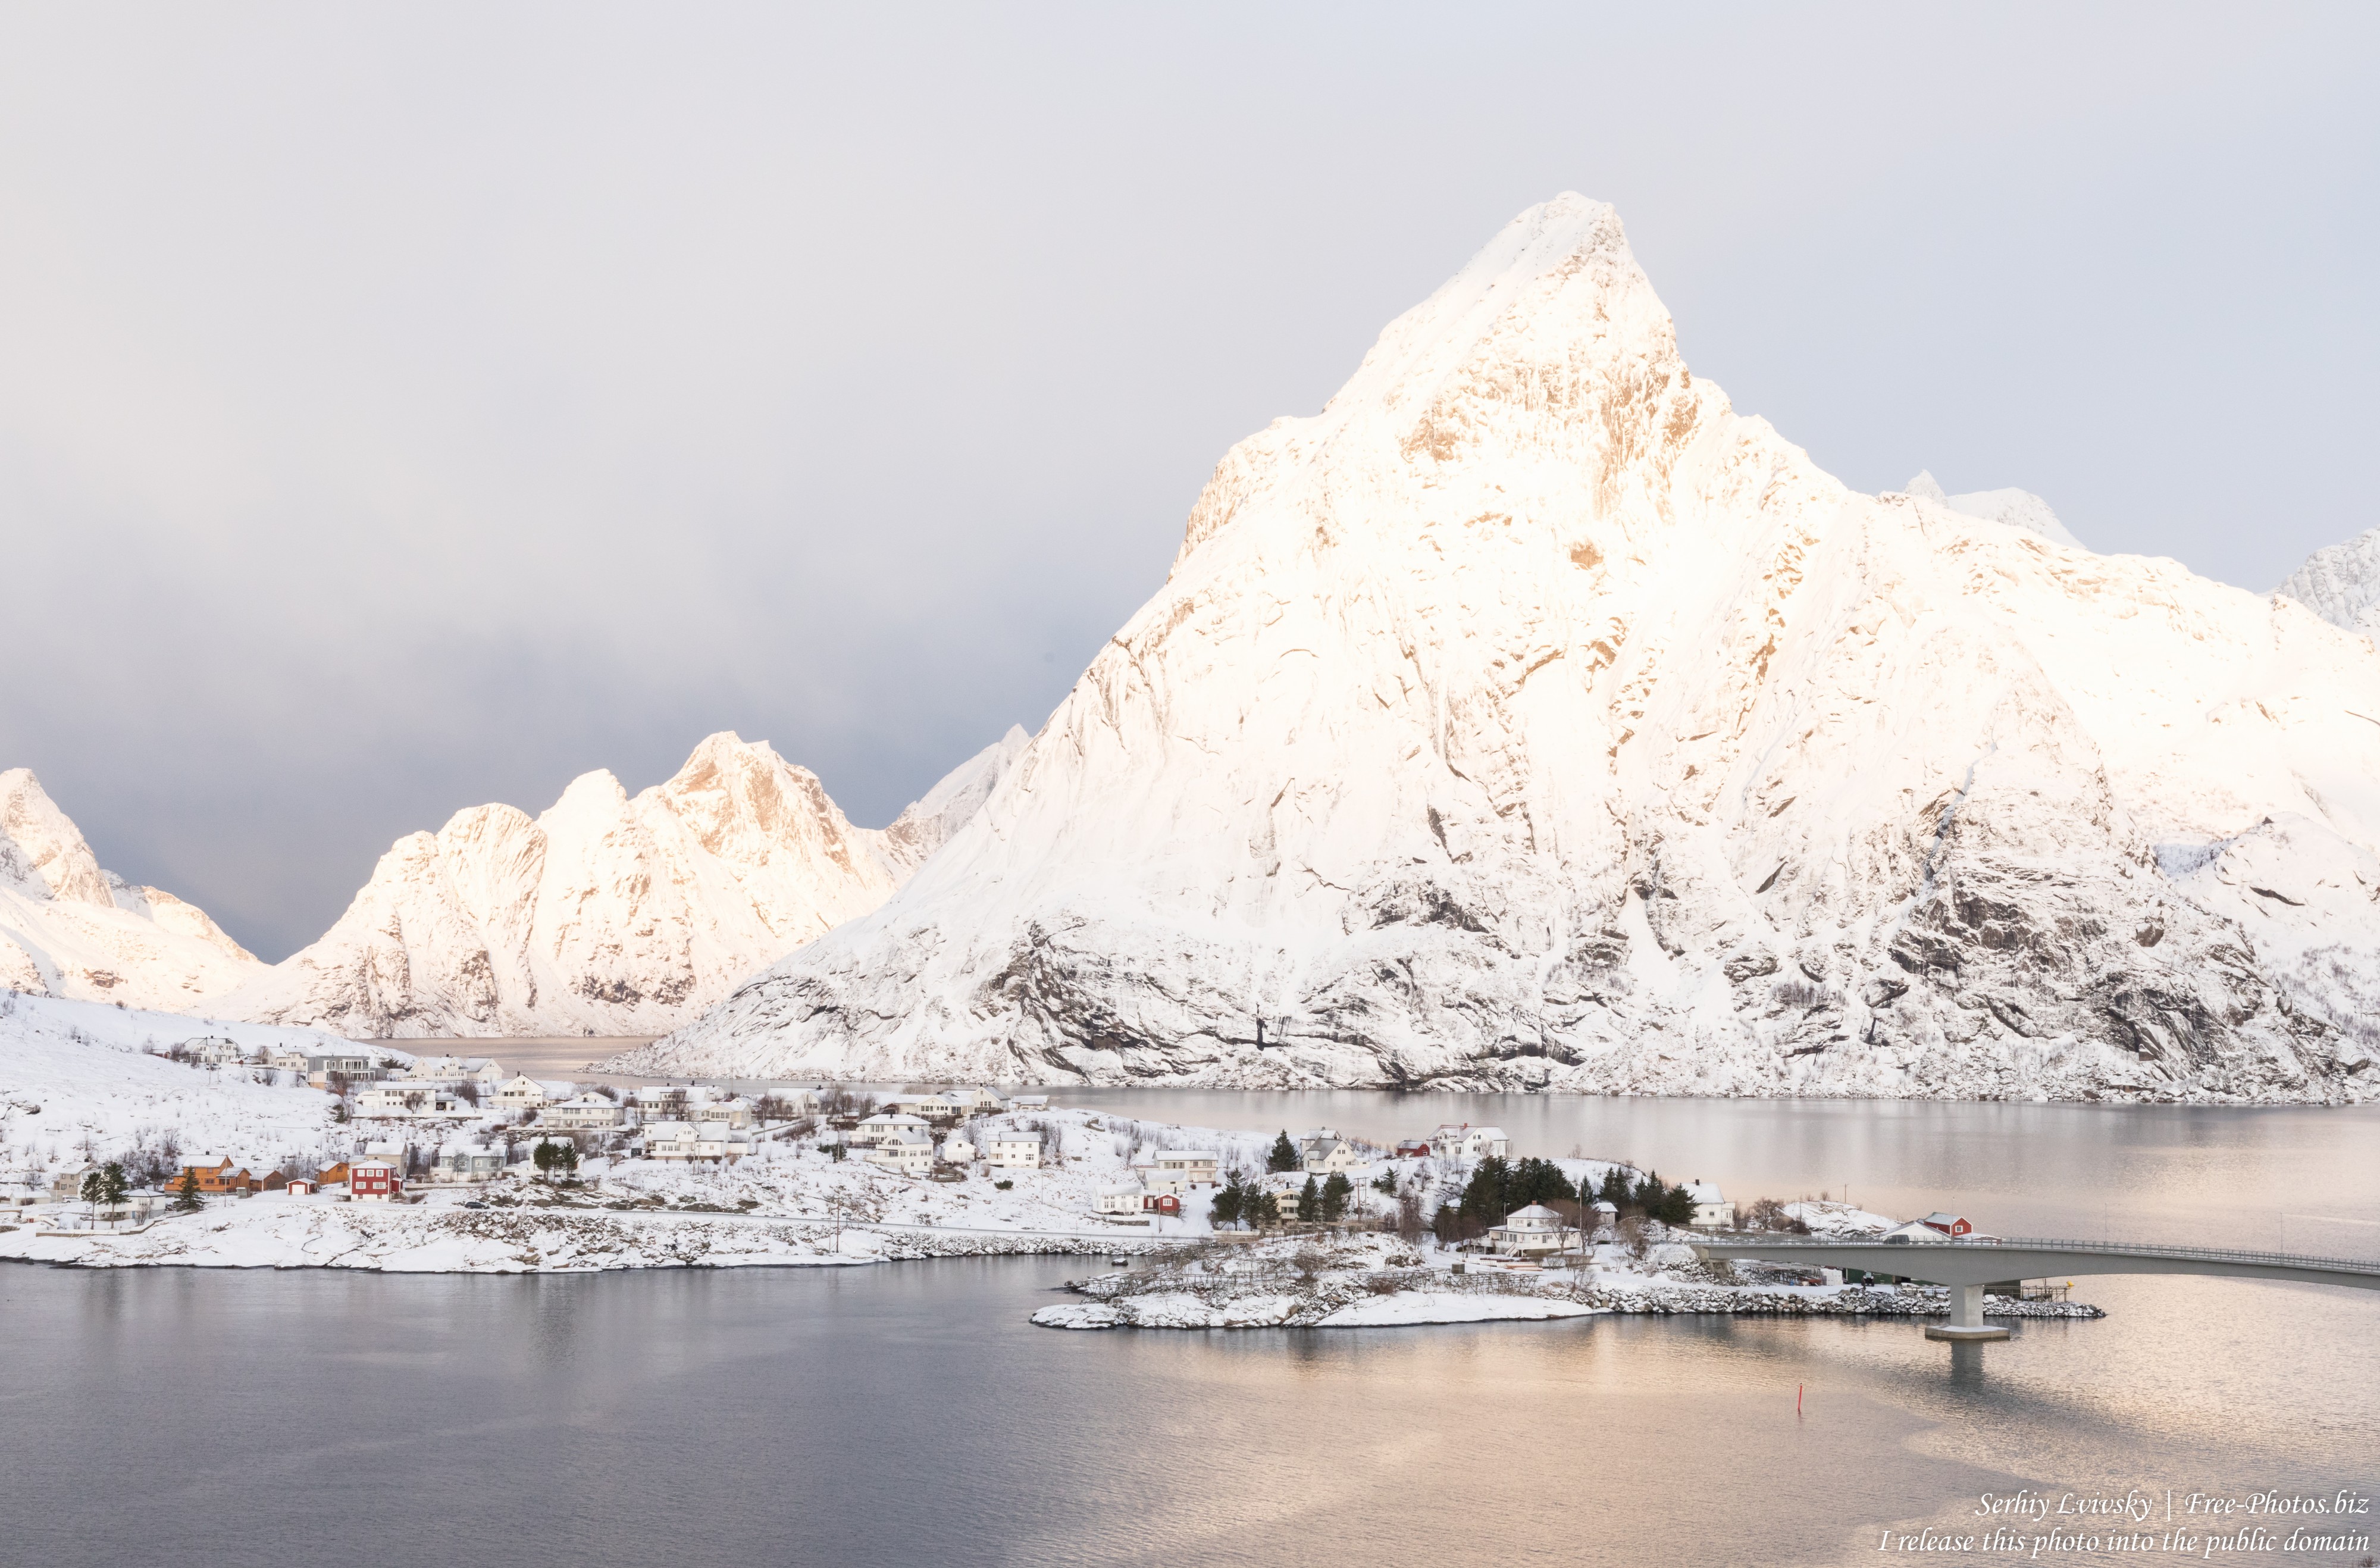 Sakrisoy and surroundings, Norway, in February 2020 by Serhiy Lvivsky, picture 26